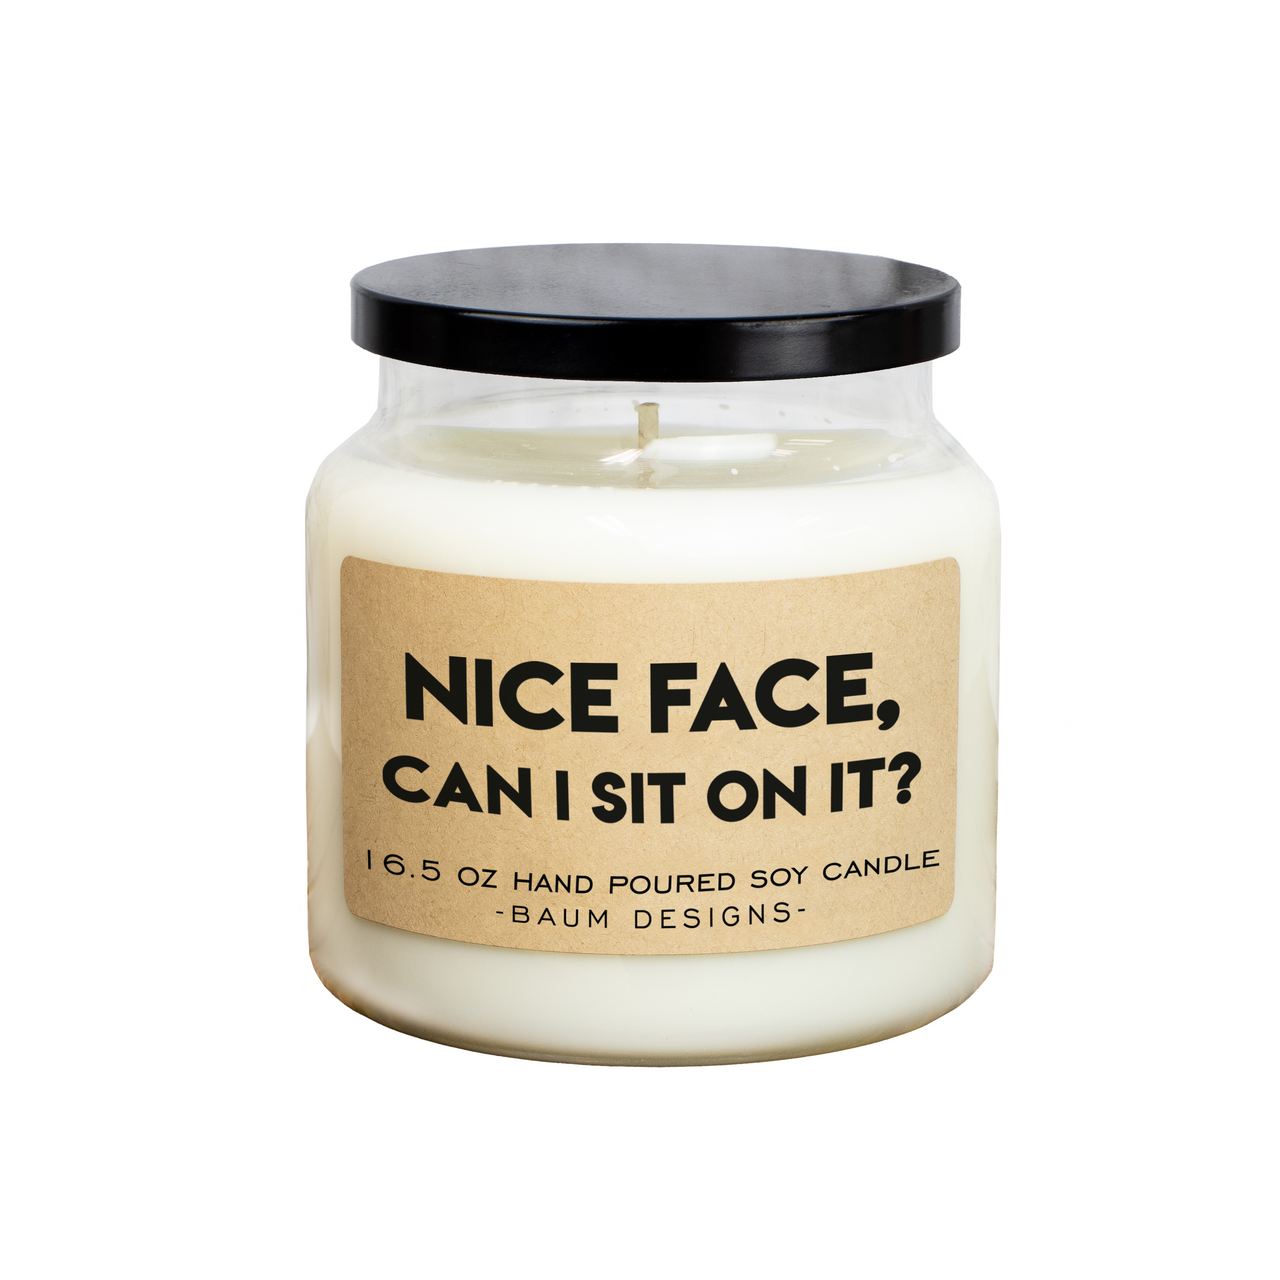 Nice Face, Can I Sit On It? Soy Candle Baum Designs